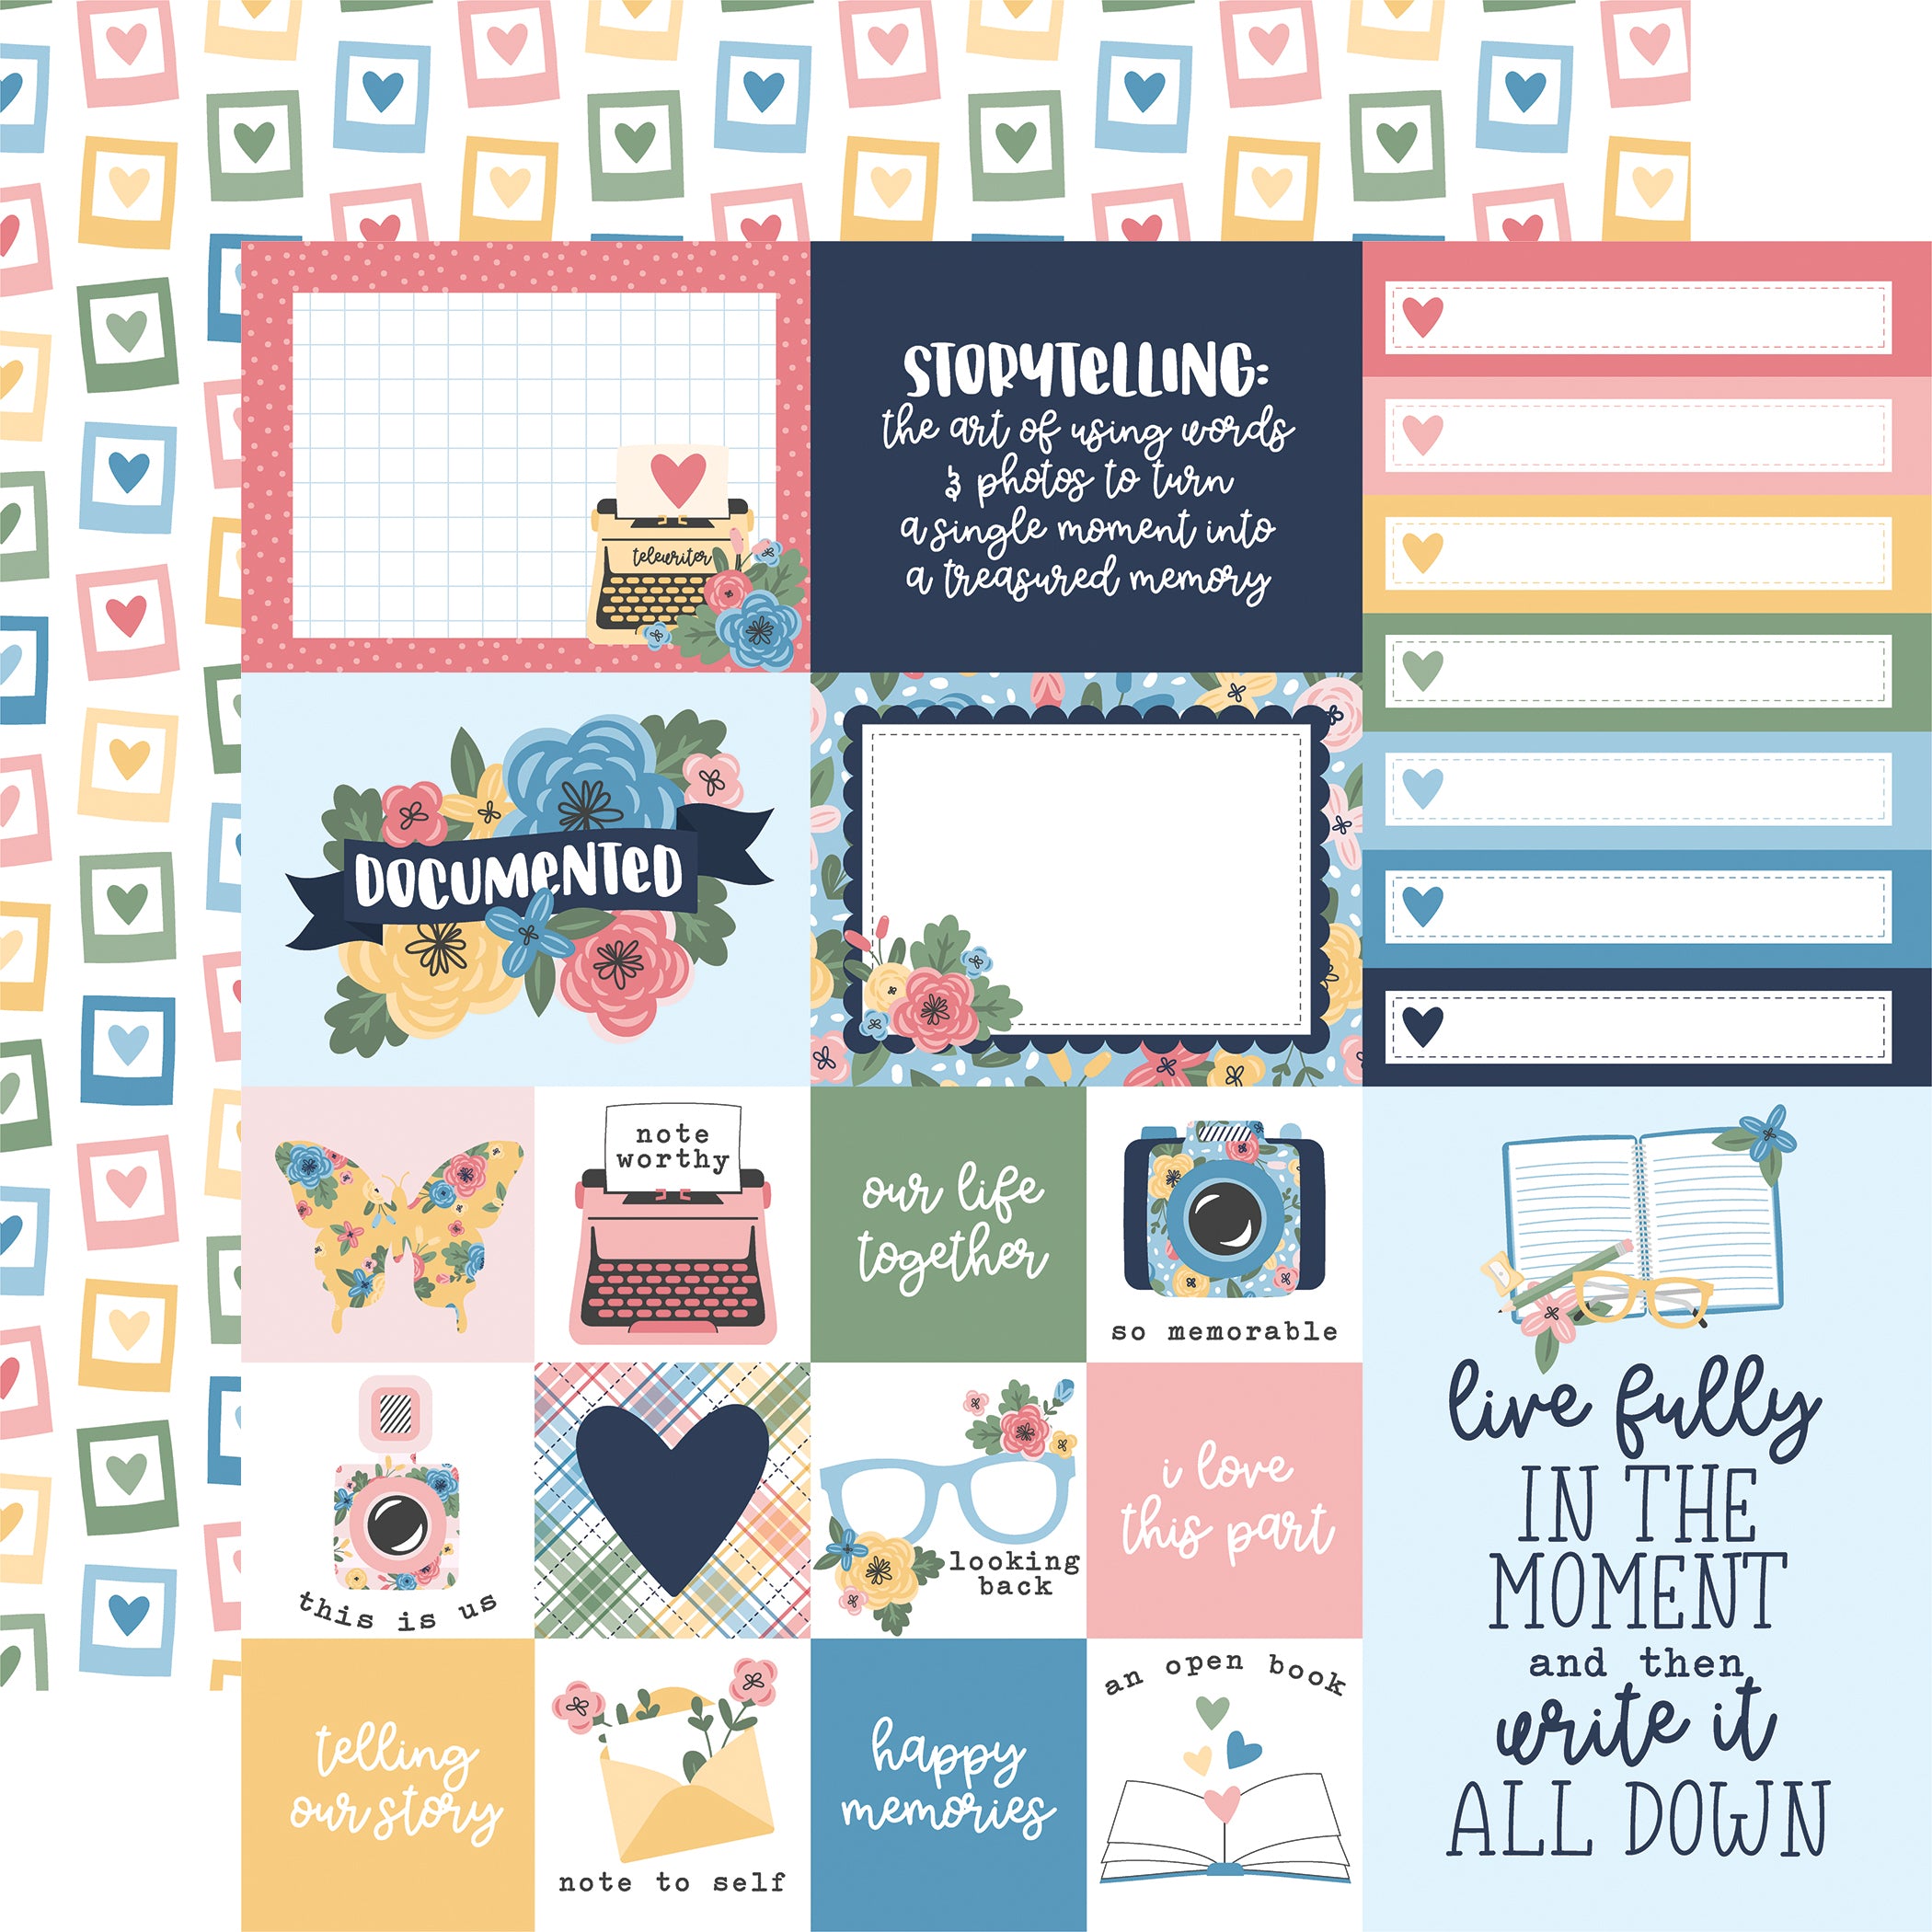 Our Story Matters Collection 12 x 12 Scrapbook Collection Pack by Echo Park Paper